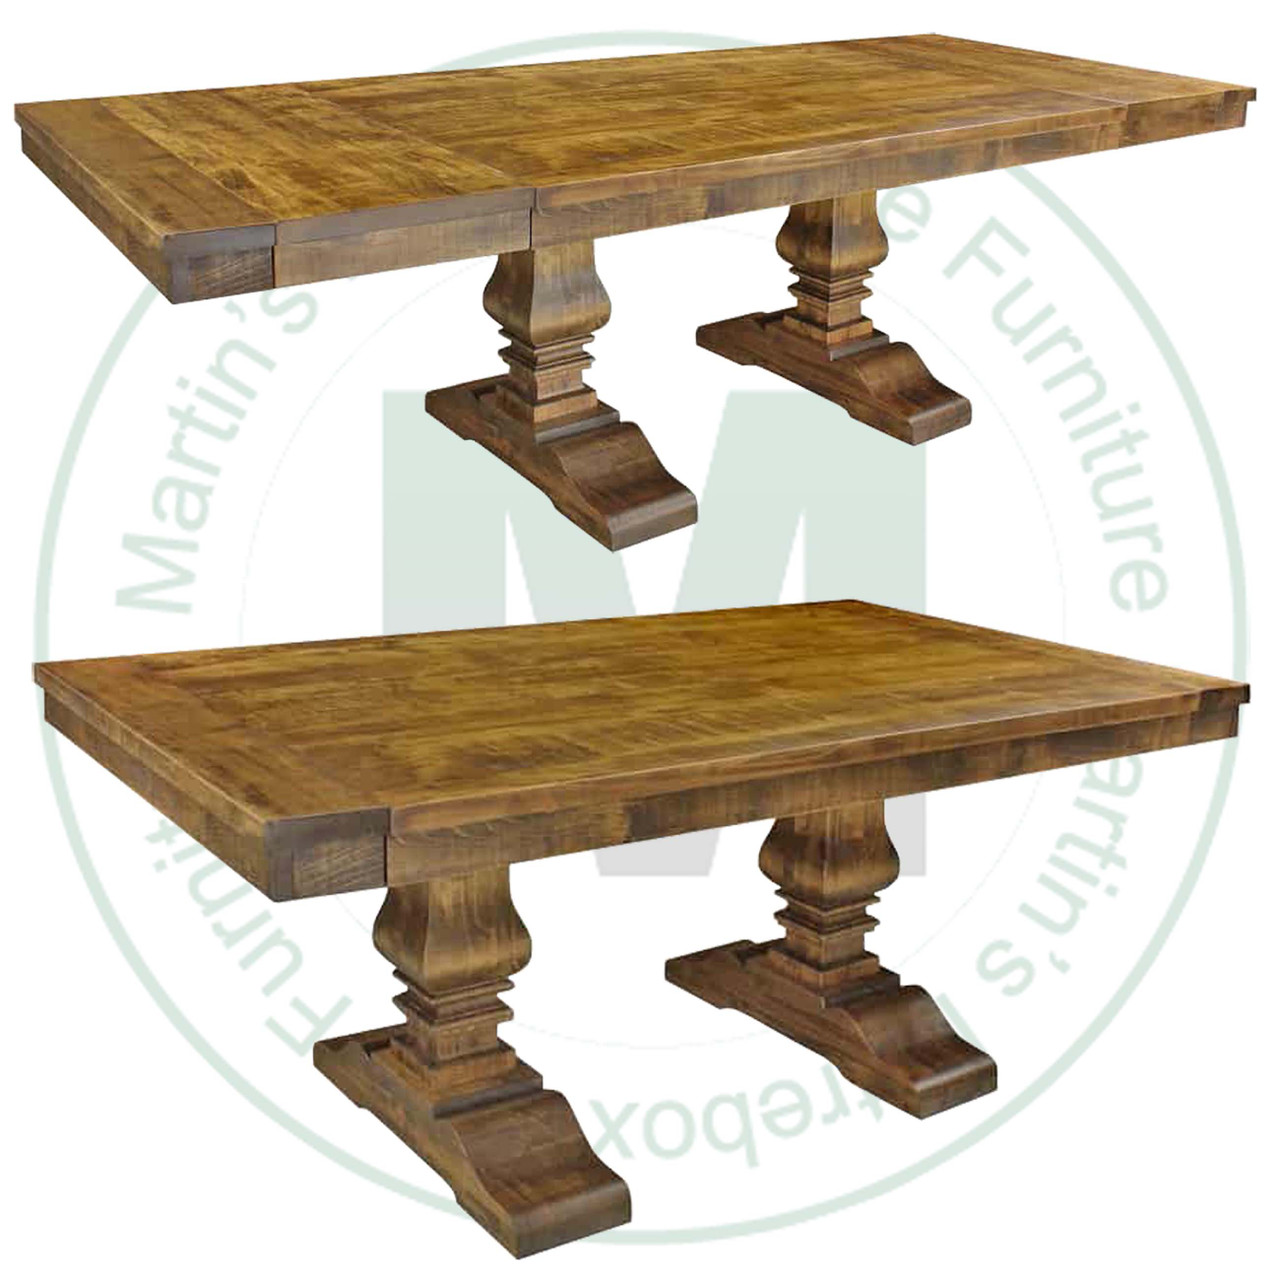 Maple Century Solid Top Double Pedestal Table 36'' Deep x 96'' Wide x 30'' High With 2 - 16'' End Leaves